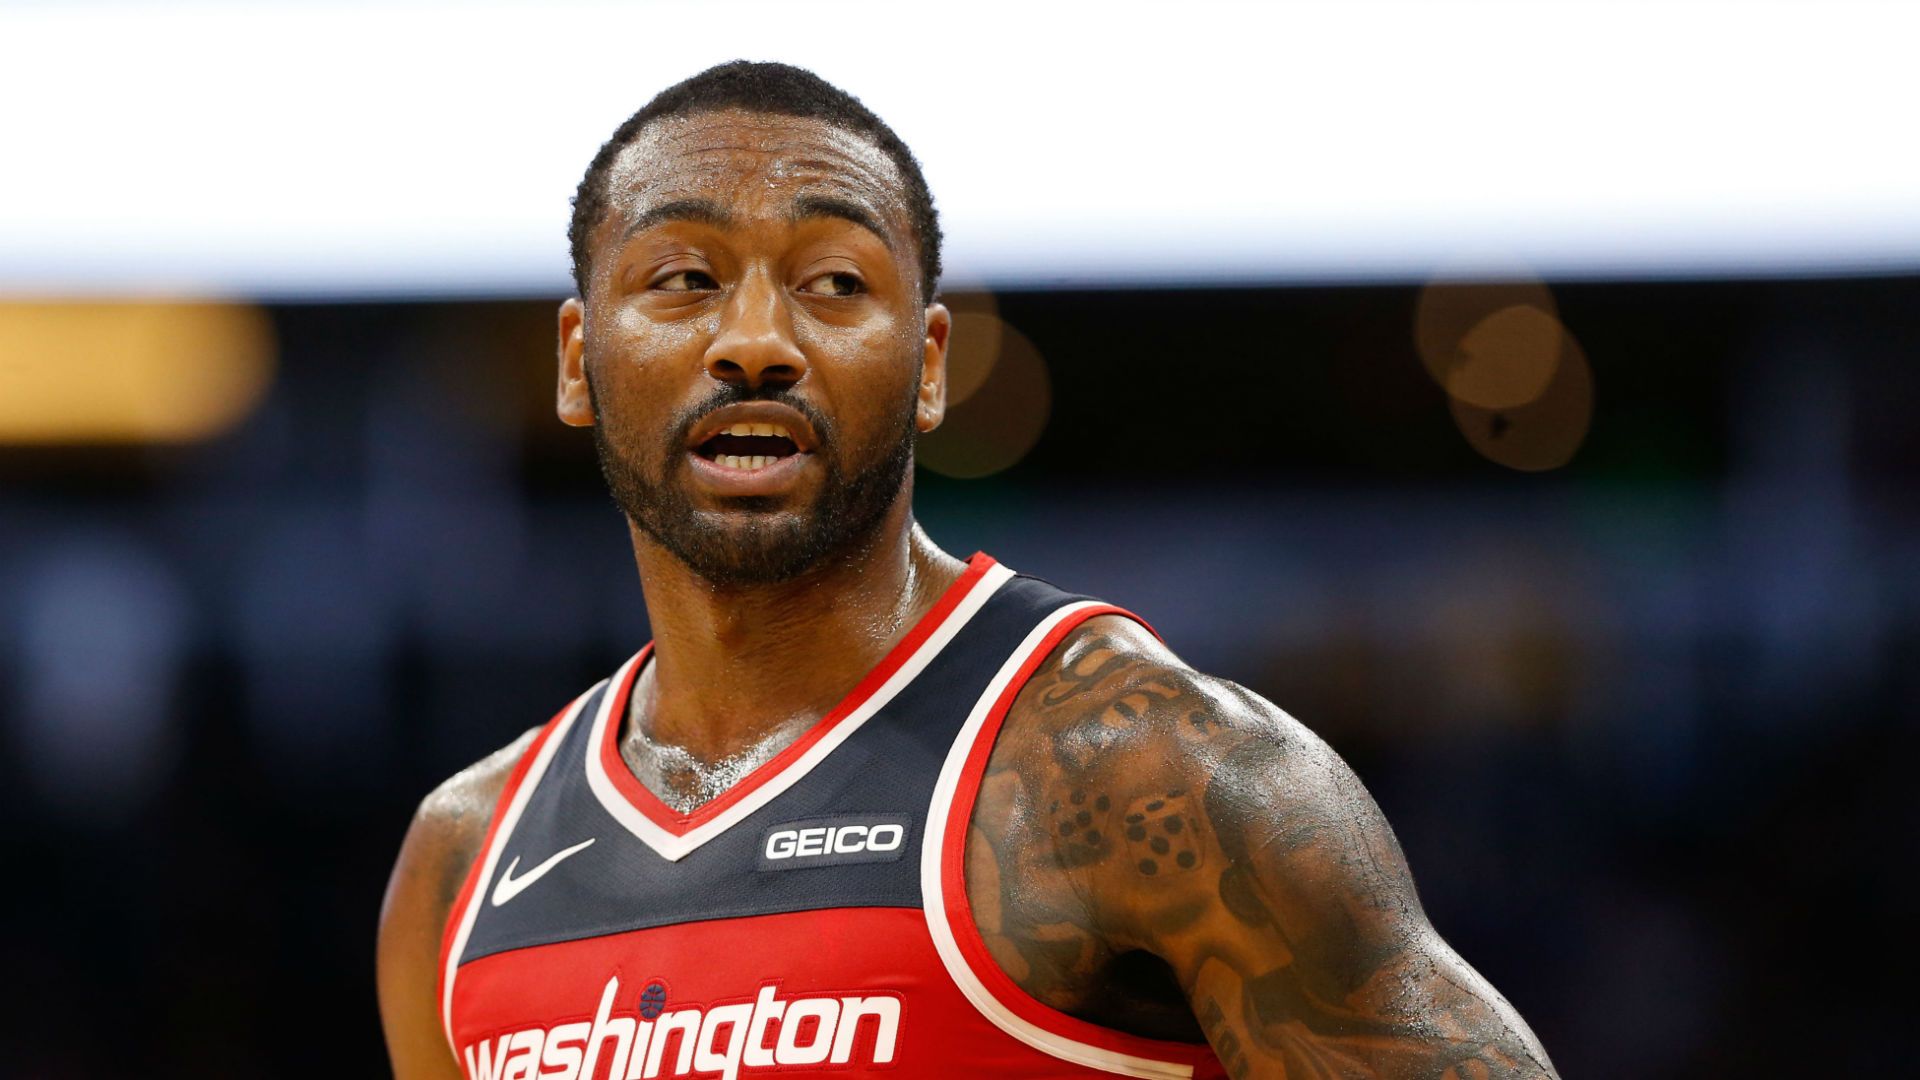 NBA Trade Buzz: Heat Making A Play For Wizards’ Wall And Beal